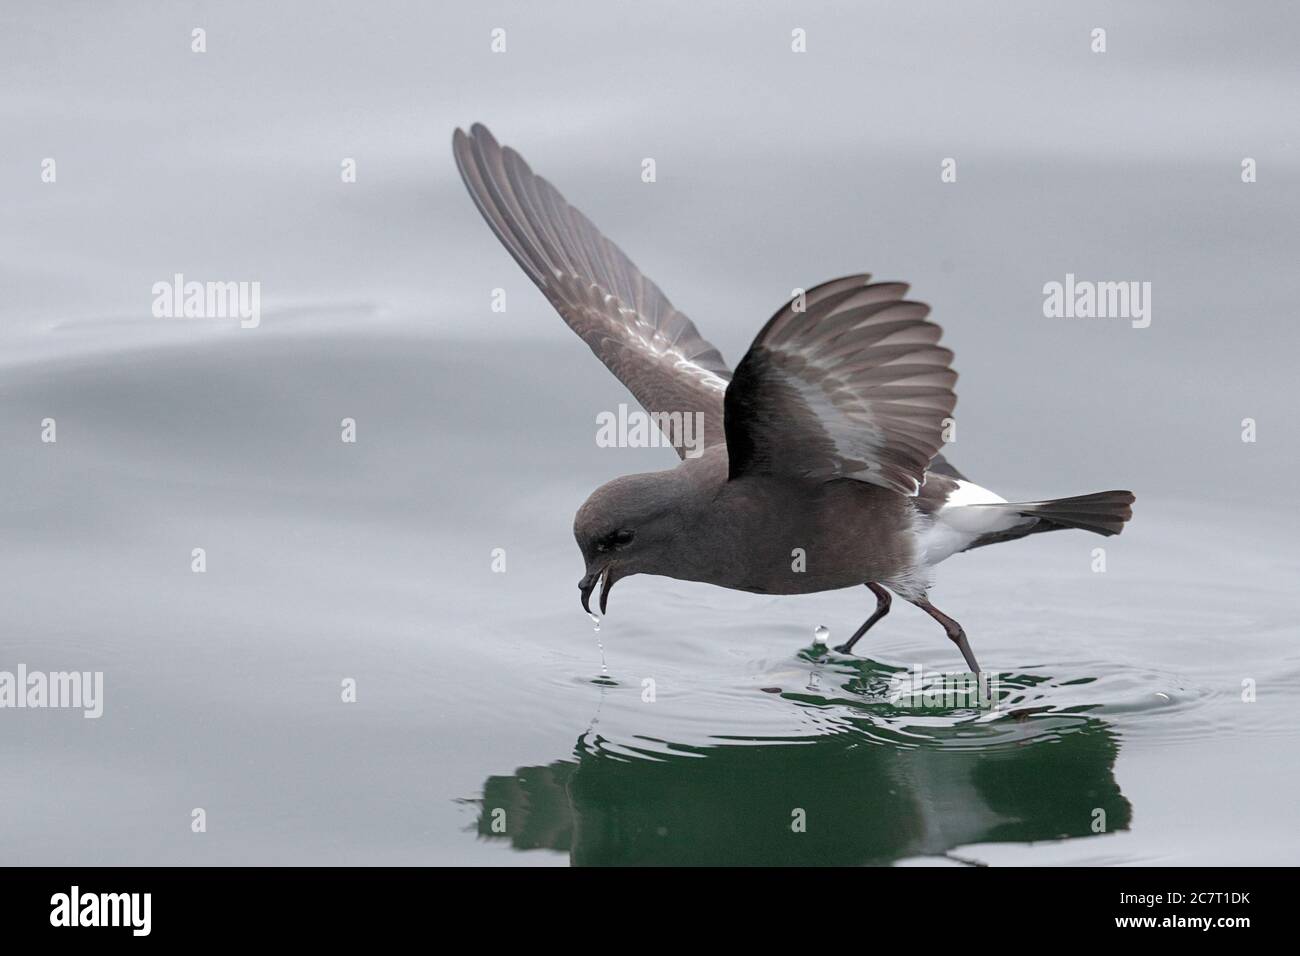 Pincoya Storm-Petrel (Oceanites pincoyae) flying over sea surface in Gulf of Ancud, Puerto Montt, south Chile 25th Feb 2020 Stock Photo